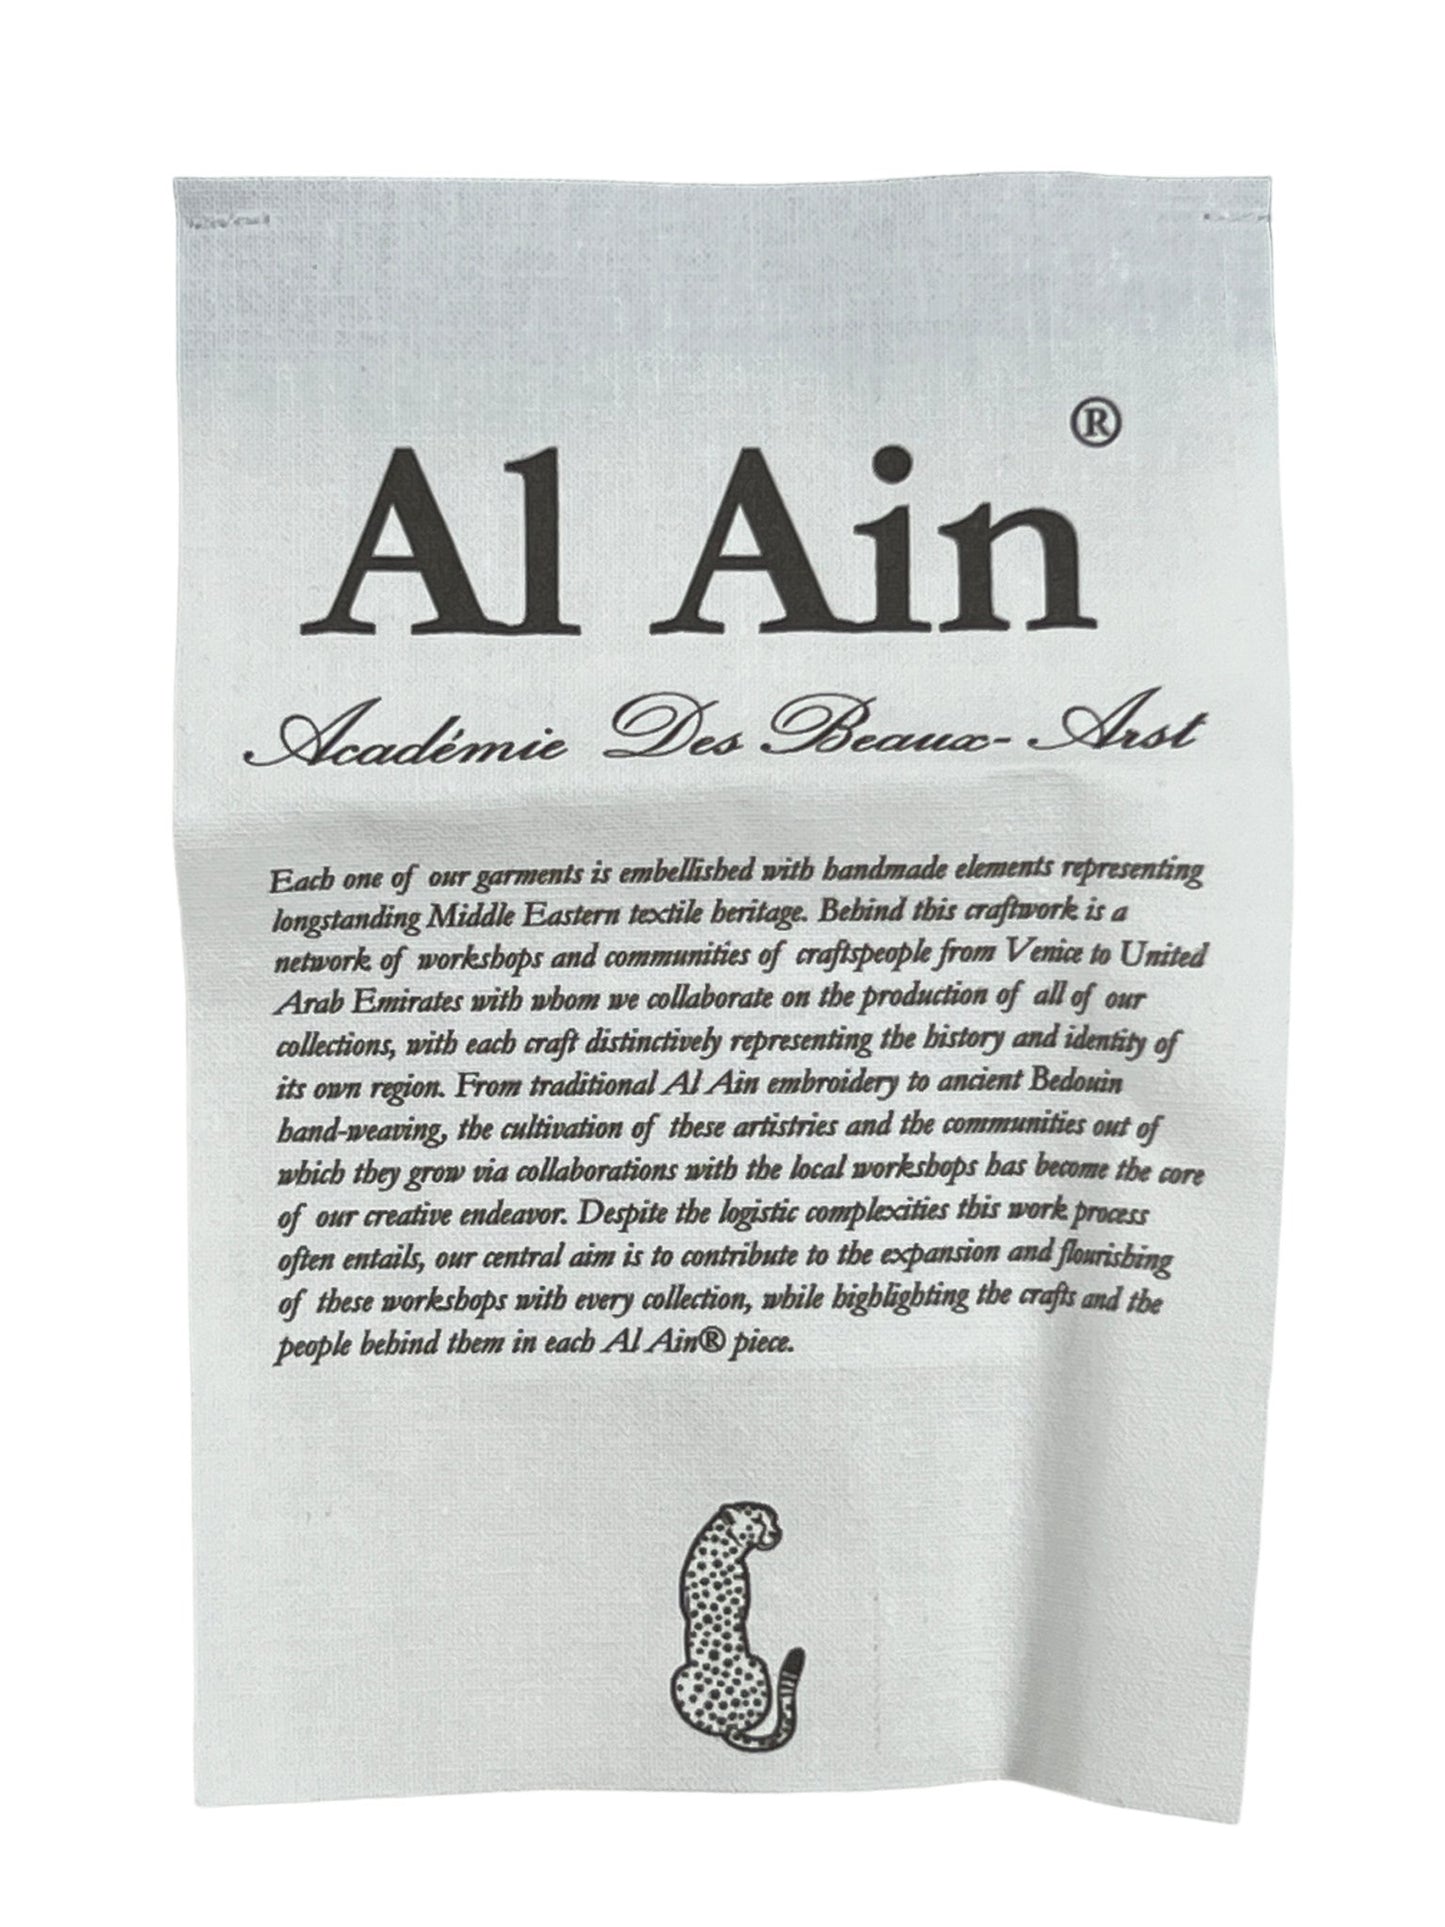 Label for "AL AIN AHZX S103 SECRET NOIR hoodie" featuring elegant text and an ornate middle eastern serpent design, along with a detailed description of the brand's commitment to artistry and heritage.